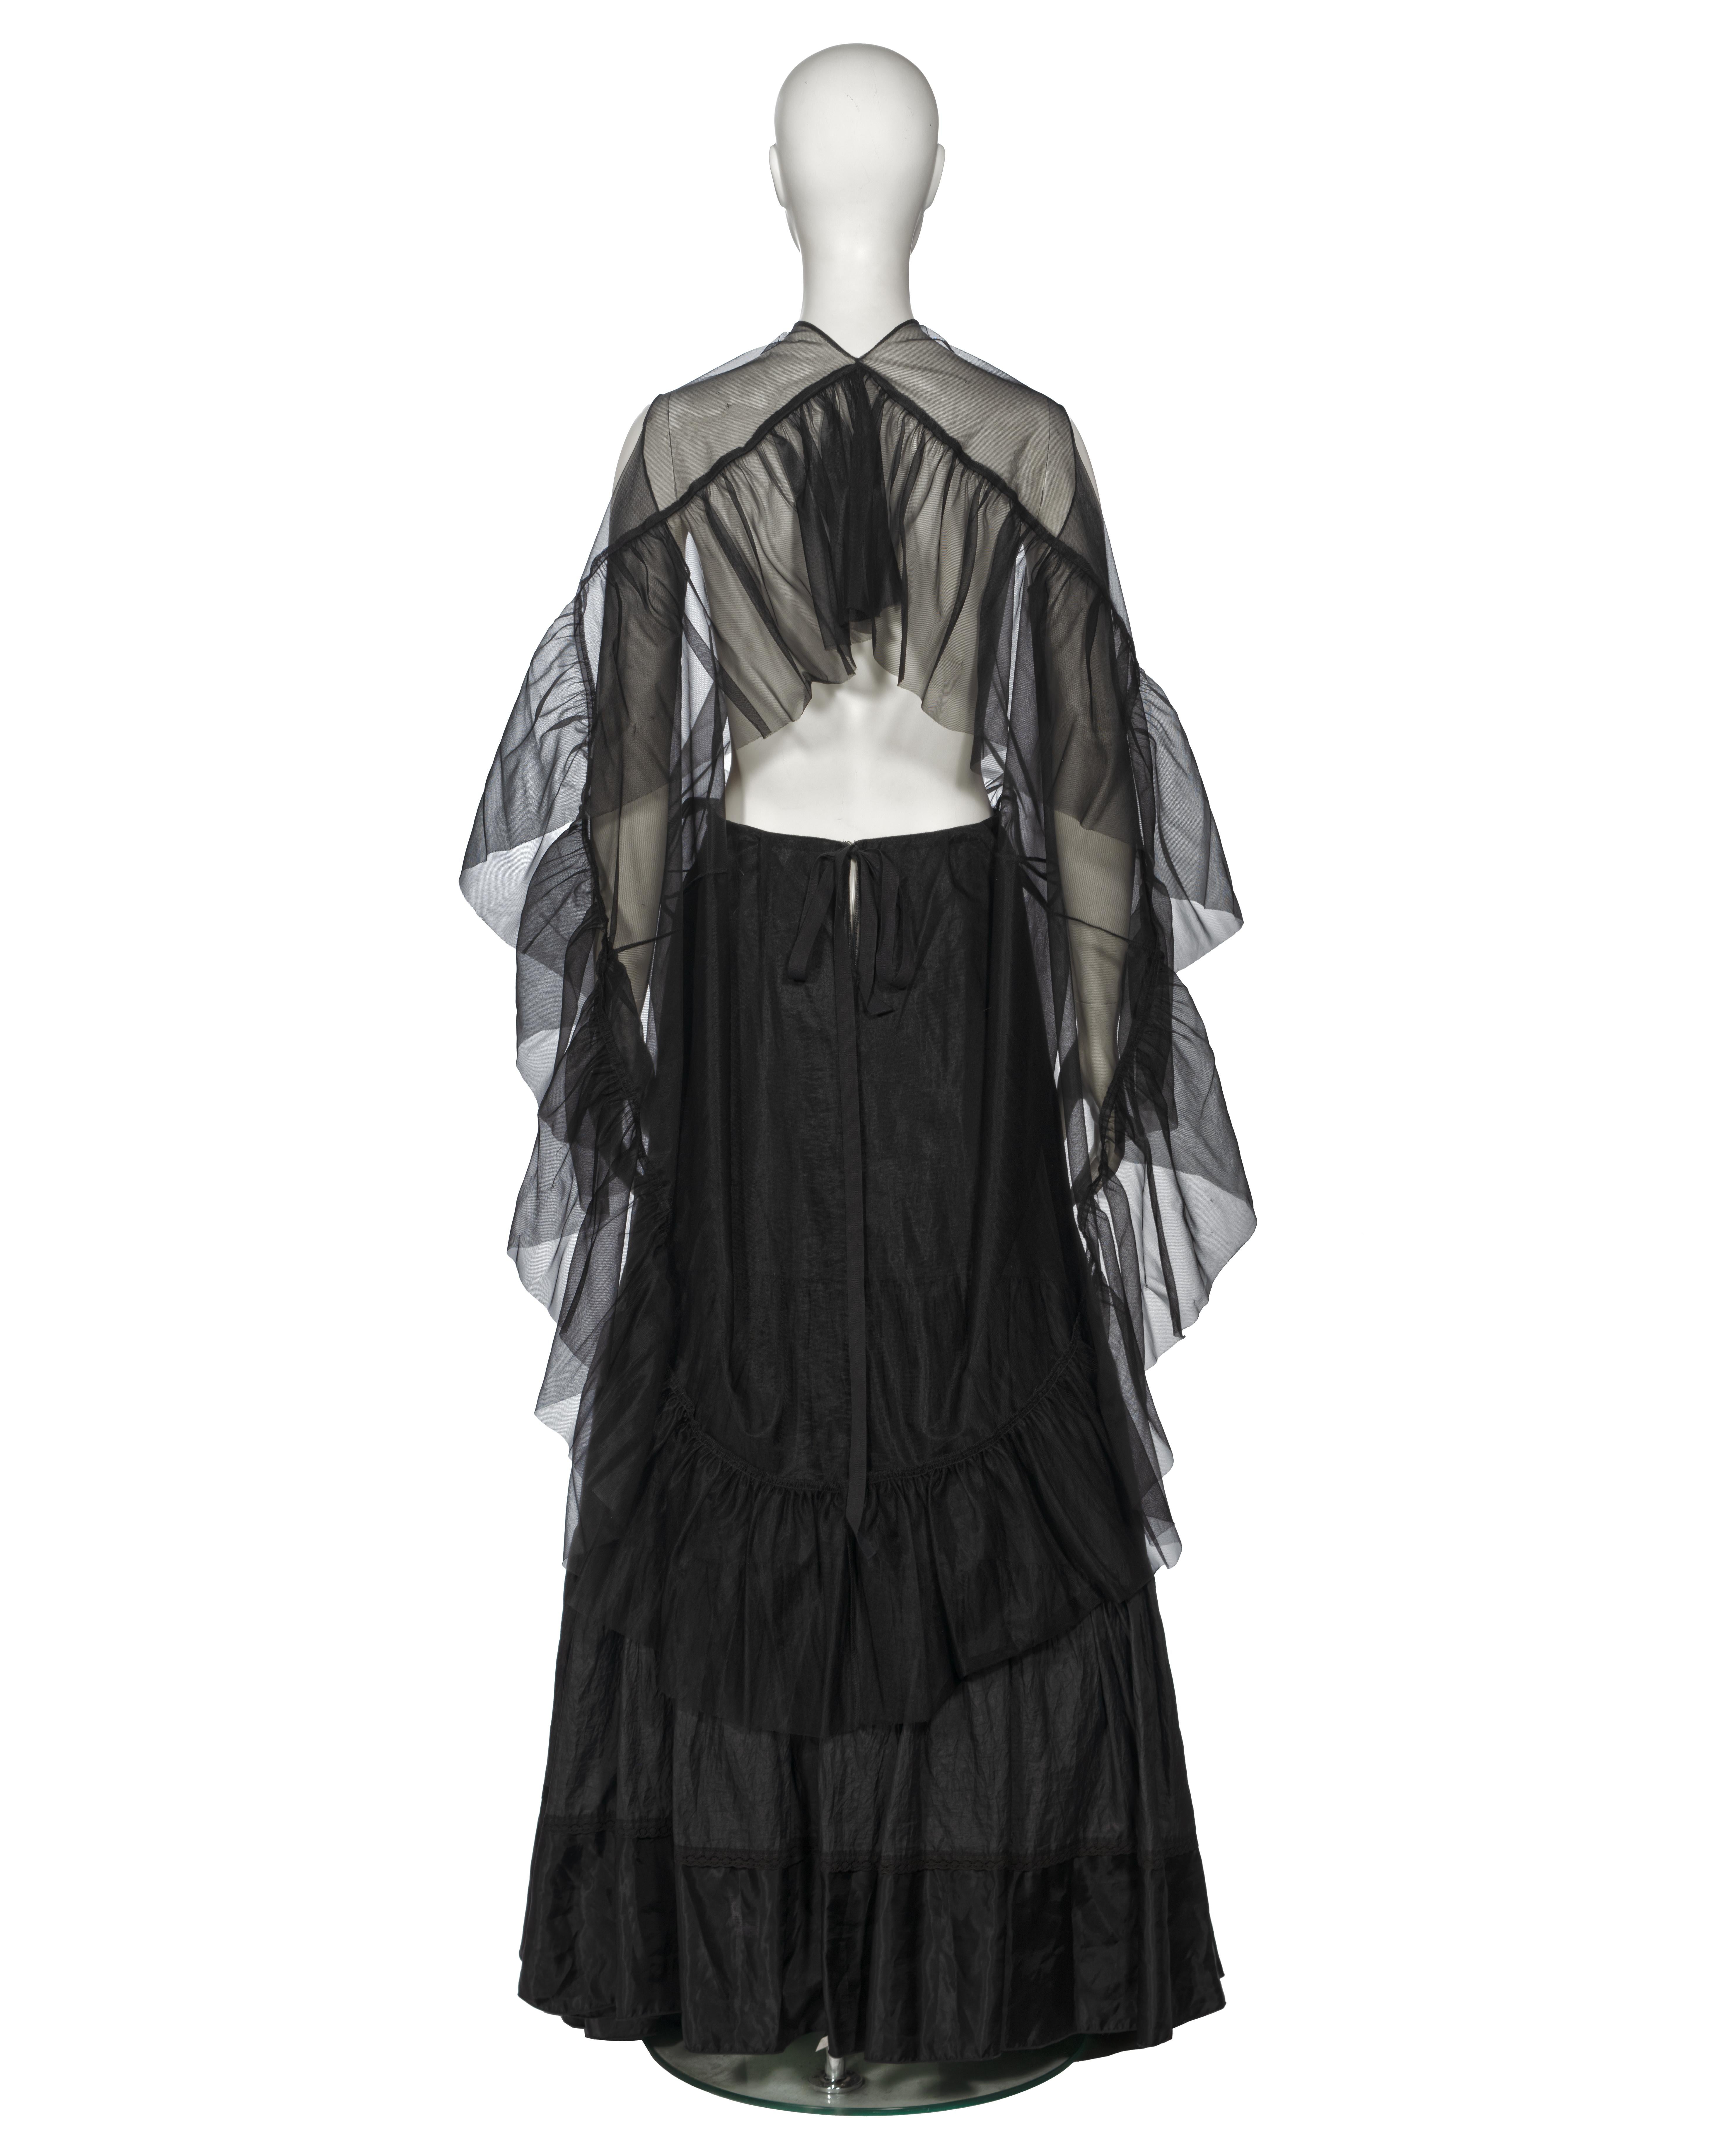 Martin Margiela Artisanal Evening Dress Made Out Of Vintage Petticoats, ss 2003 For Sale 1